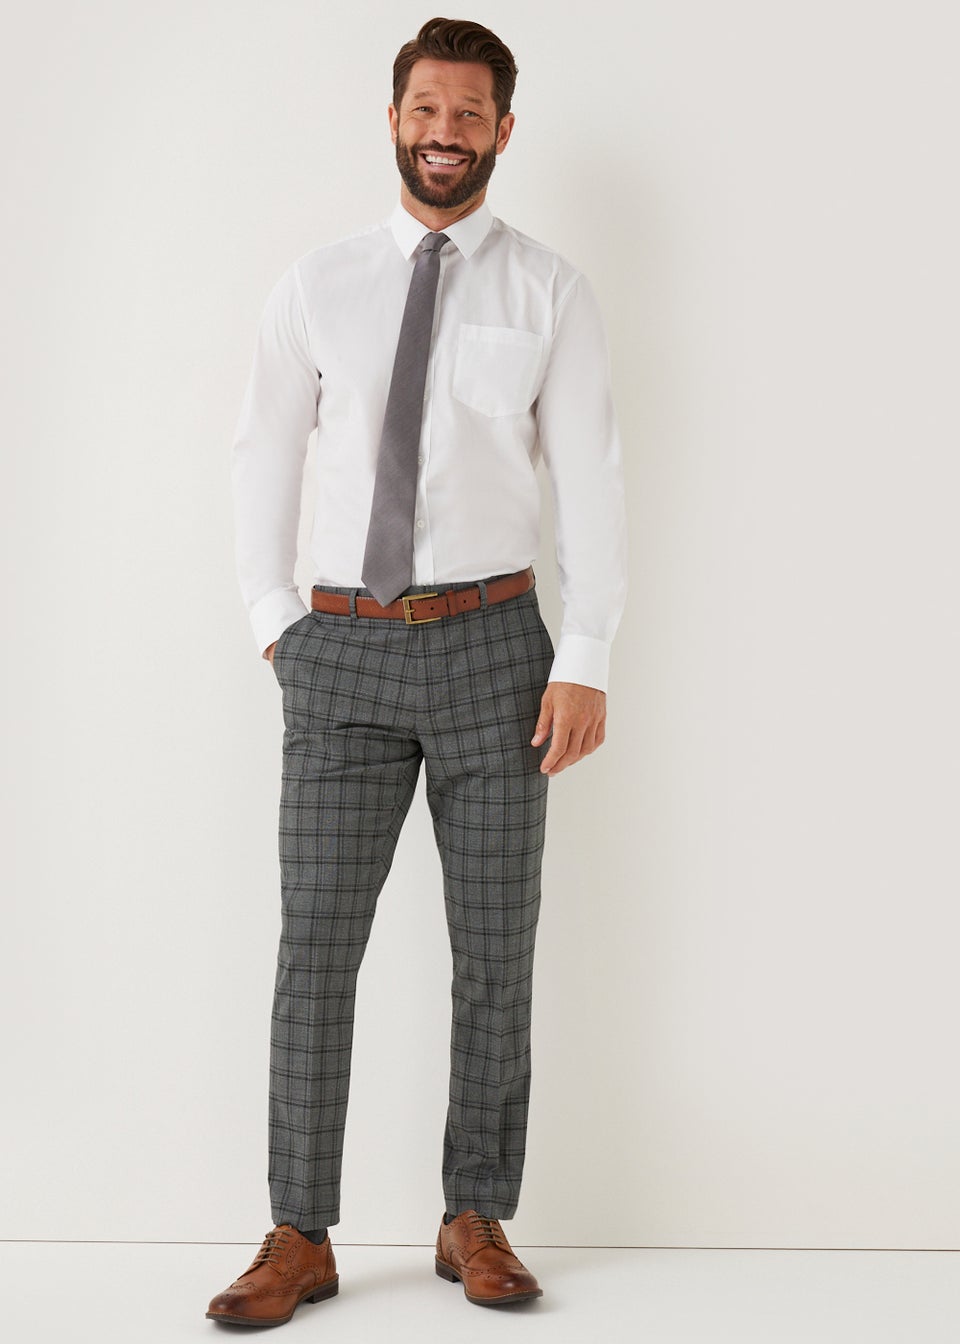 Taylor & Wright Watts Grey Skinny Fit Suit Trousers